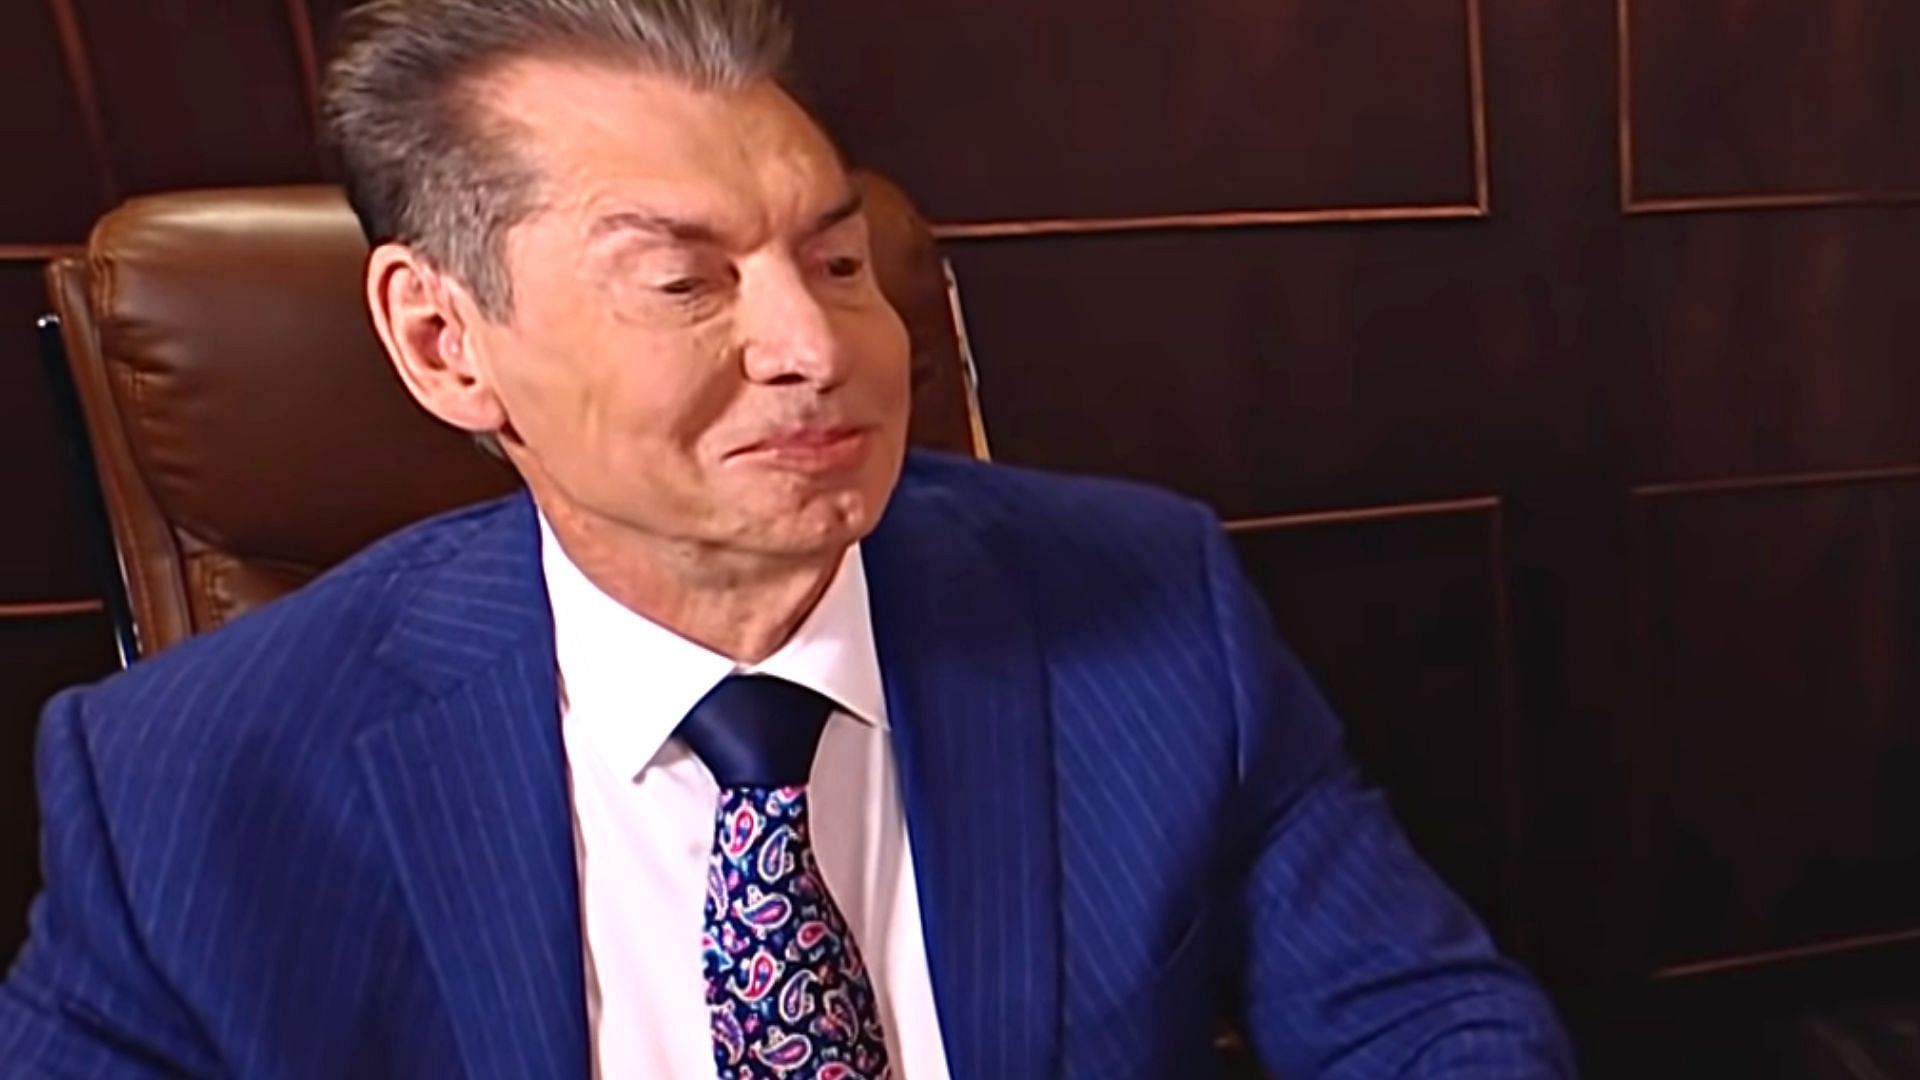 The re-signed WWE legend specifically thanked Vince McMahon.